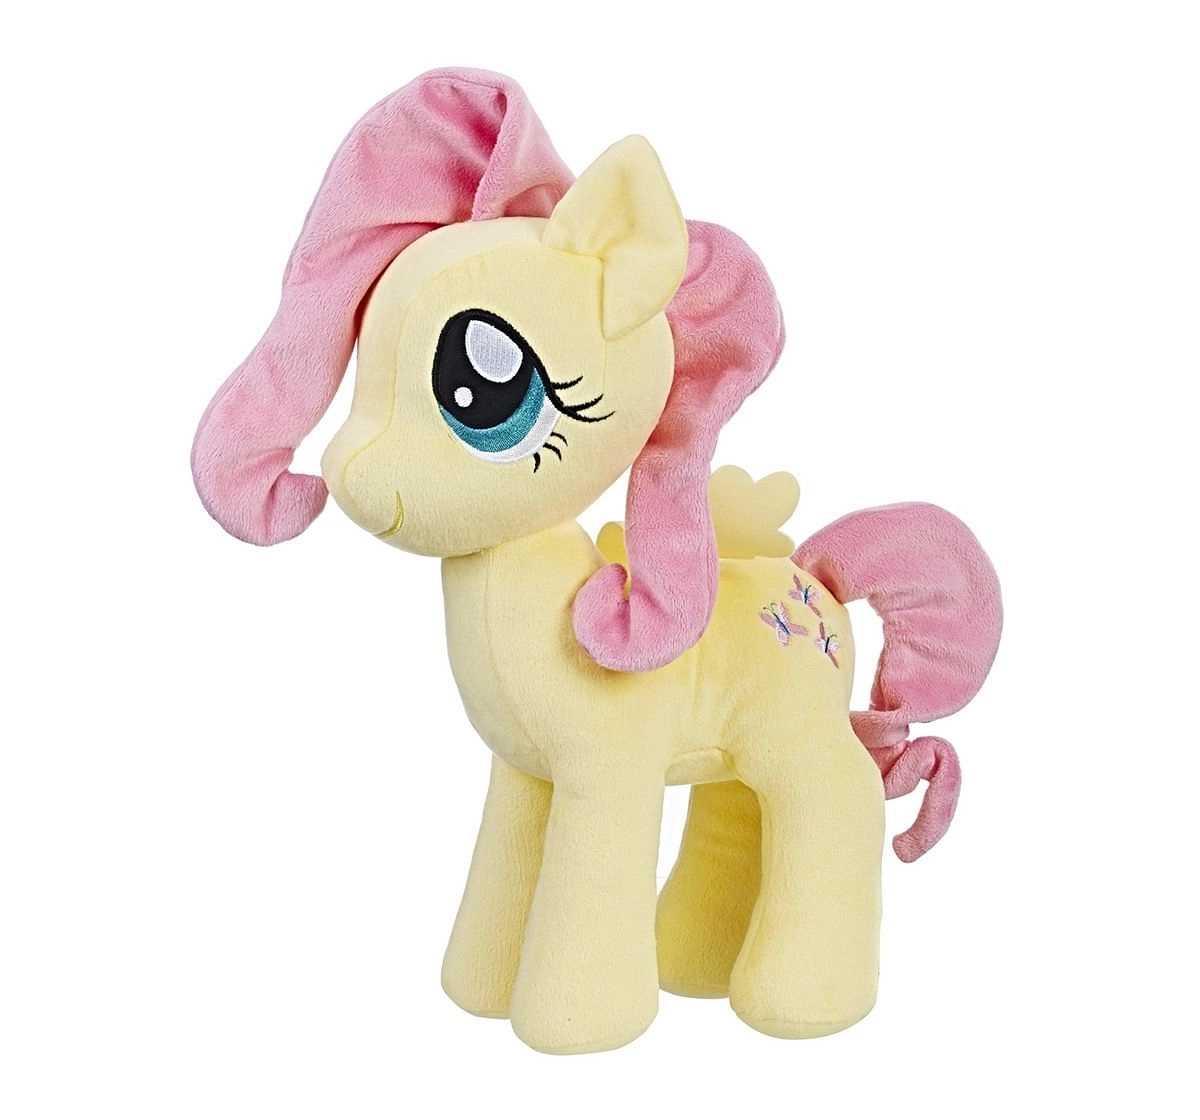  My Little Pony Cuddly Plush Figures Assorted Character Soft Toys for Kids age 3Y+ - 30.48 Cm 